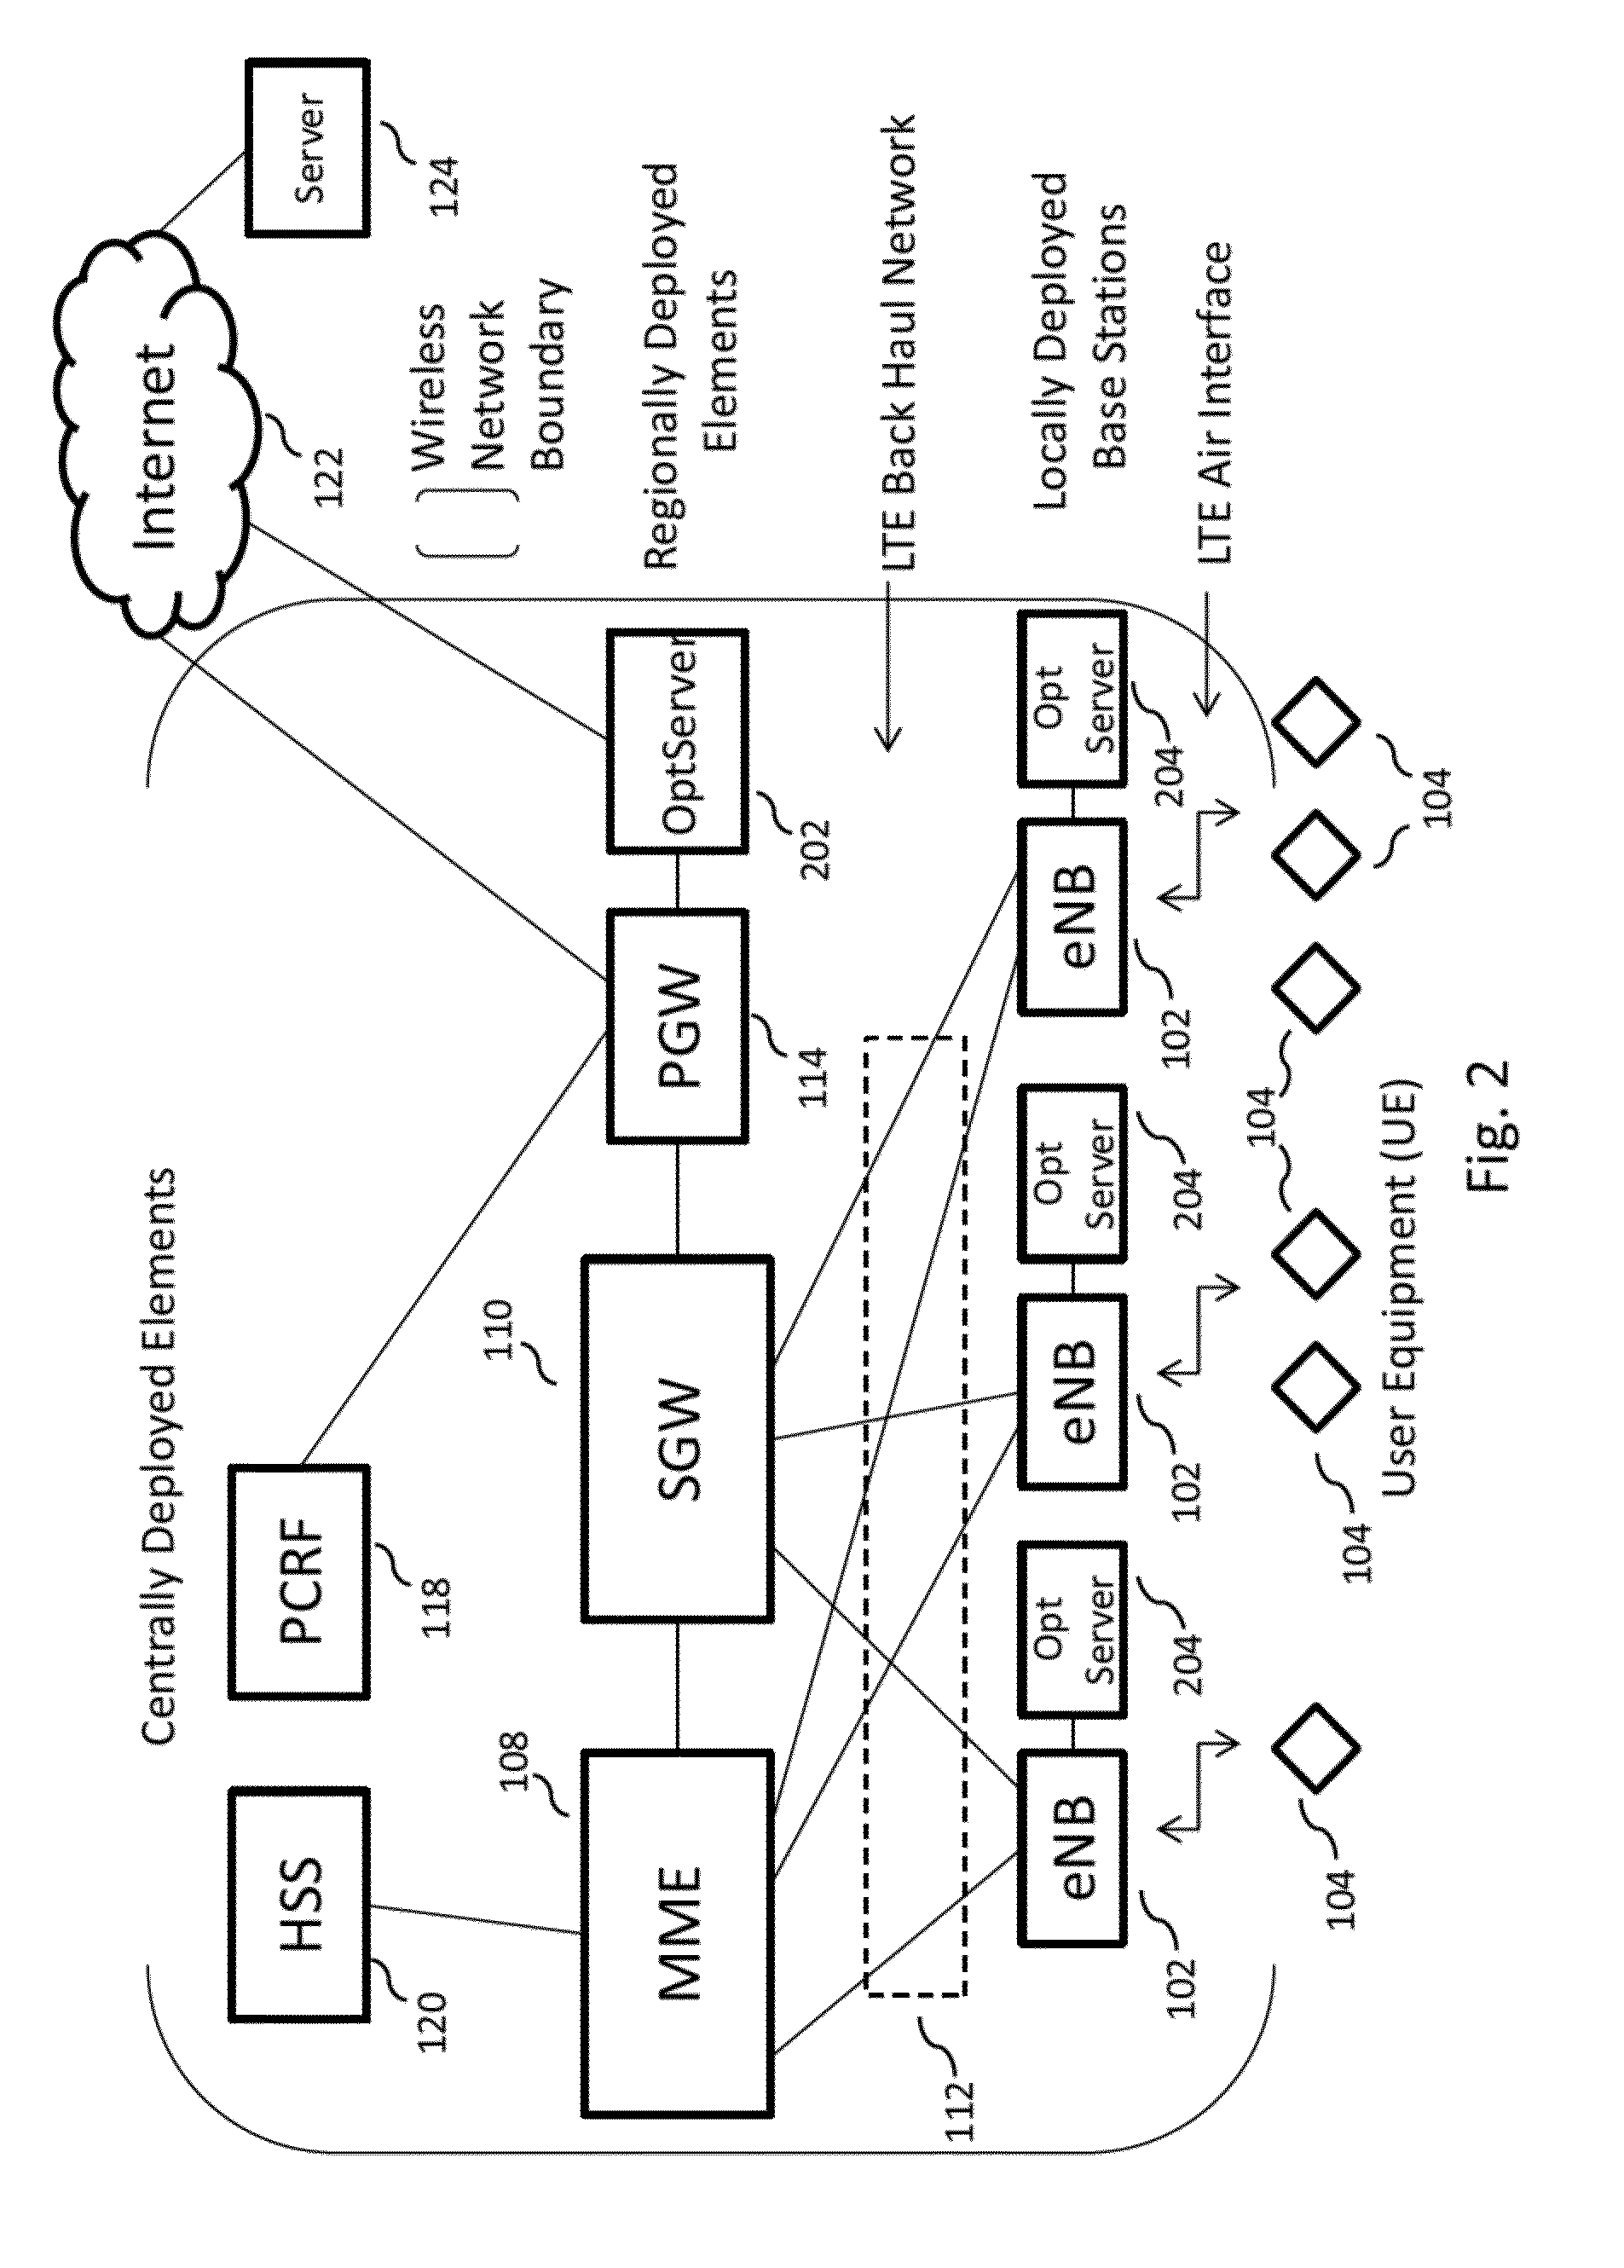 Network migration queuing service in a wireless network